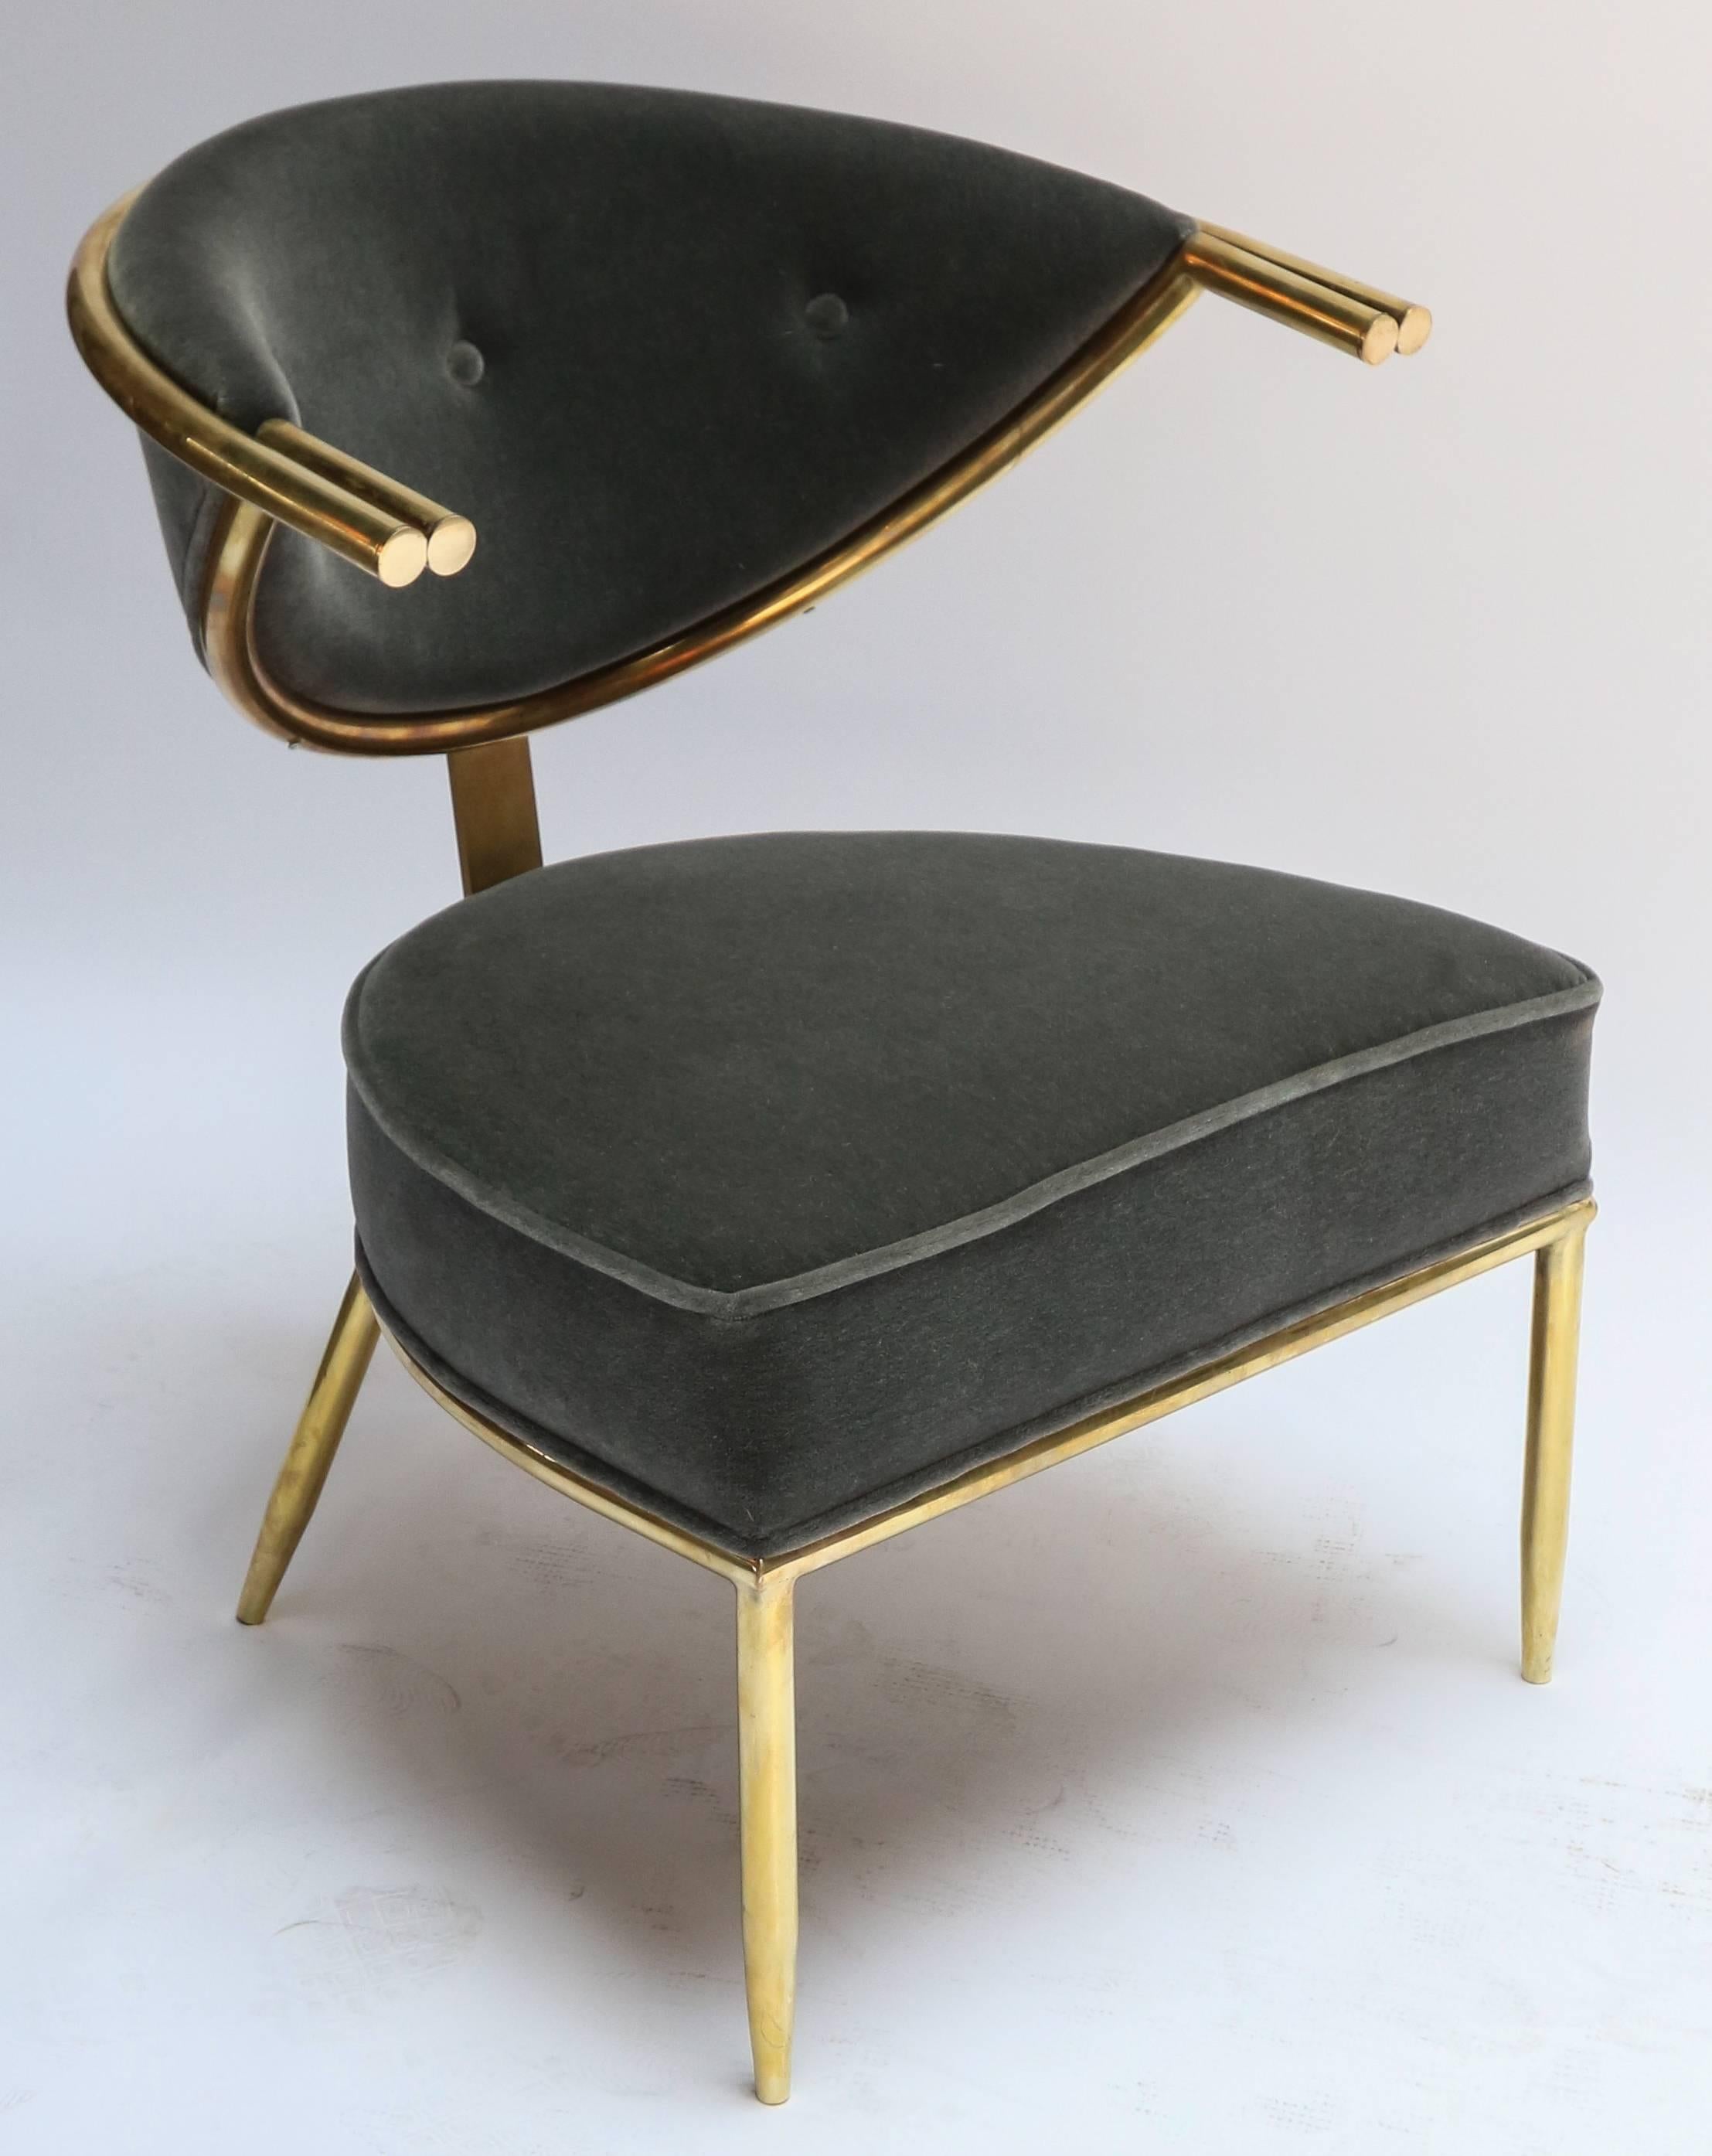 Pair of chairs with brass frame, upholstered in grey mohair by Maurice Bailey for Monteverdi-Young.